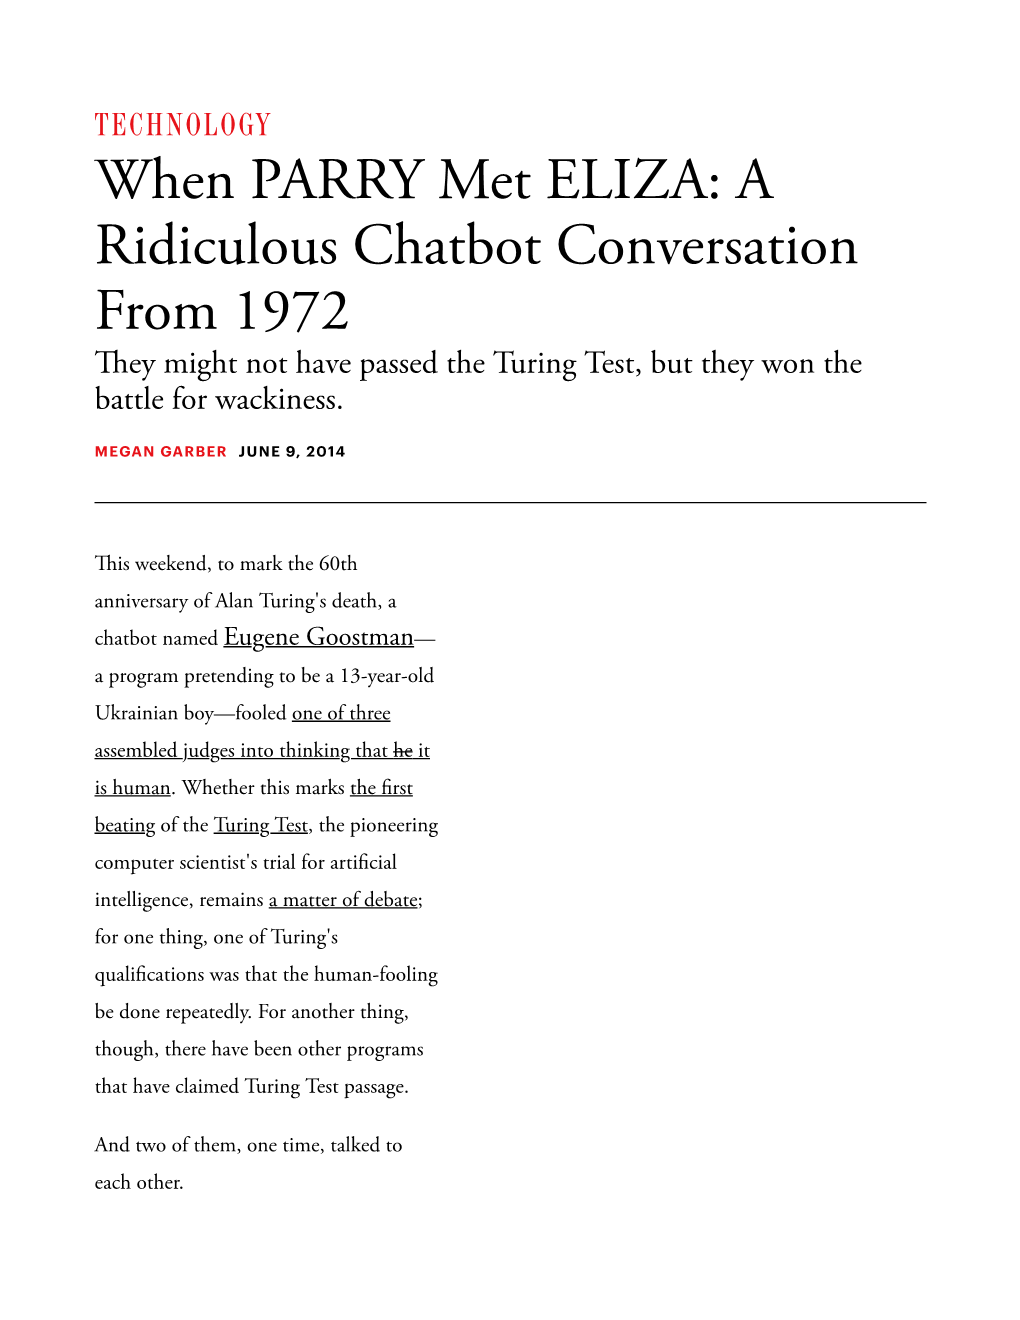 When PARRY Met ELIZA: a Ridiculous Chatbot Conversation from 1972 Tey Might Not Have Passed the Turing Test, but They Won the Battle for Wackiness